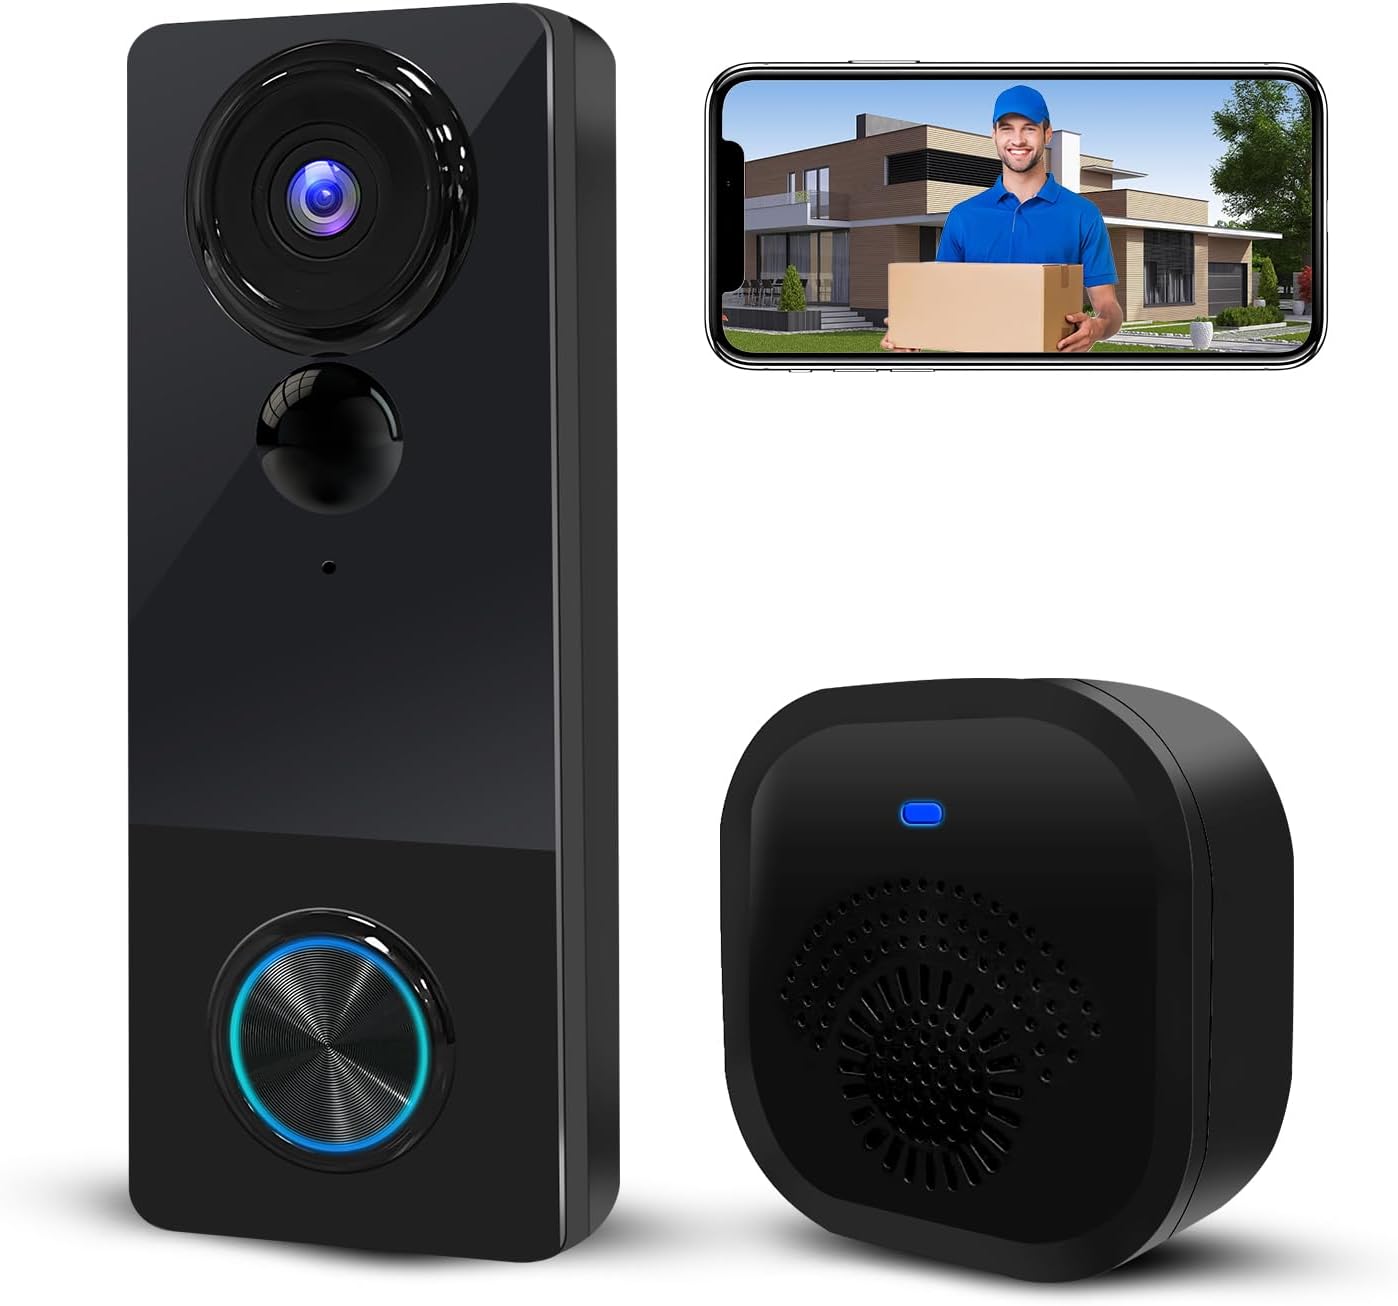 Wireless Video Doorbell Camera with Chime, 1080P HD Smart Door Bells Camera with Voice Changer, PIR Motion Detection, Night Vision, 2-Way Audio, IP66, 2.4G WiFi, Battery Powered,Works with Alexa